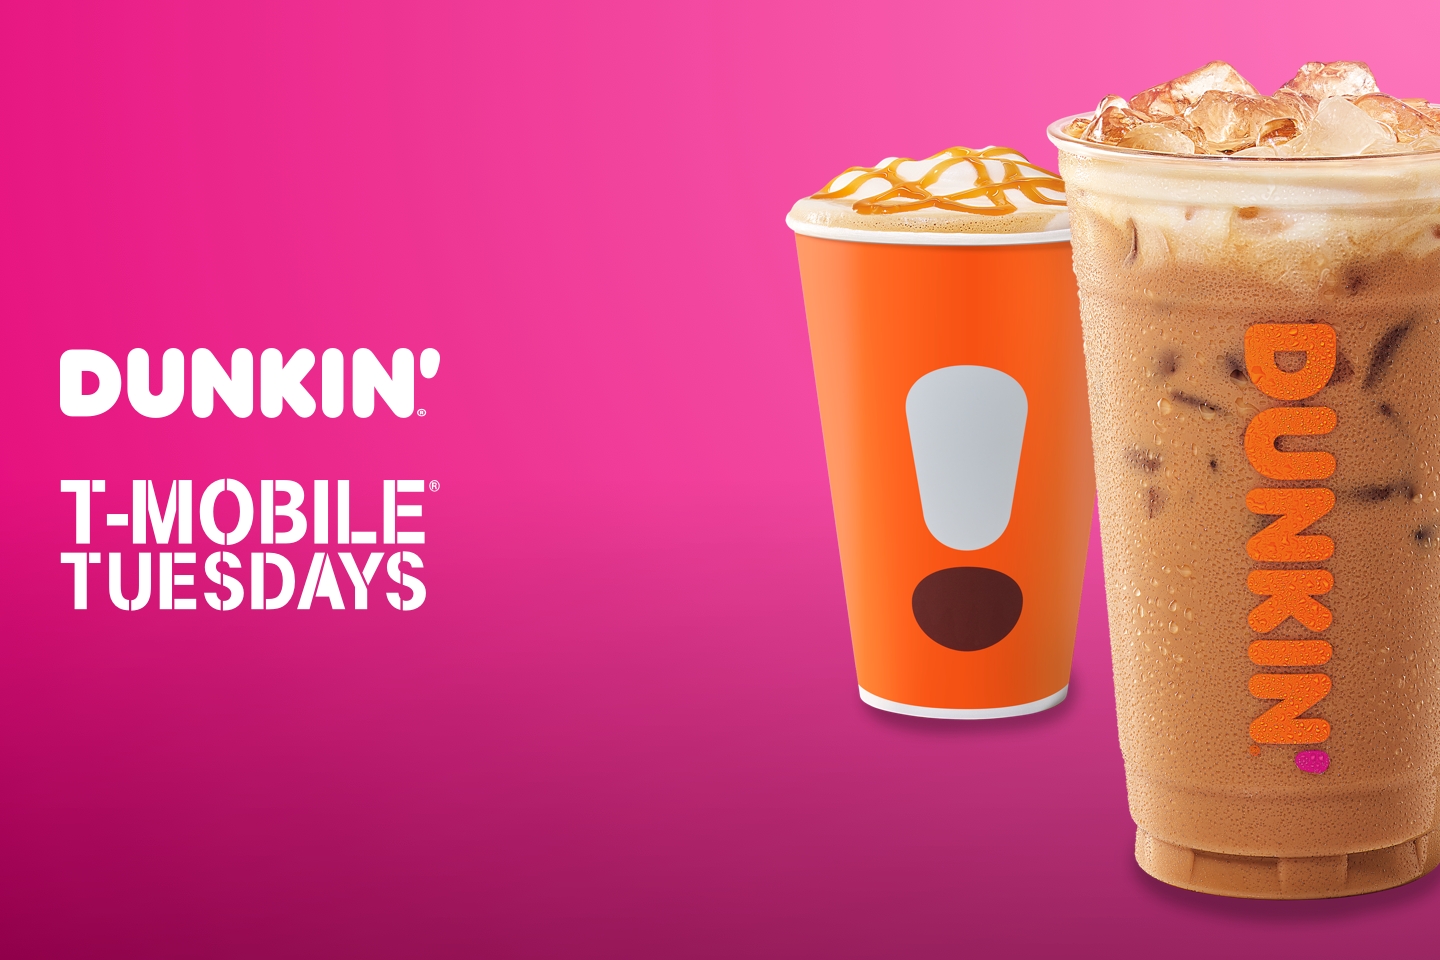 Free Dunkin Donut Gift Cards from T-Mobile Tuesdays